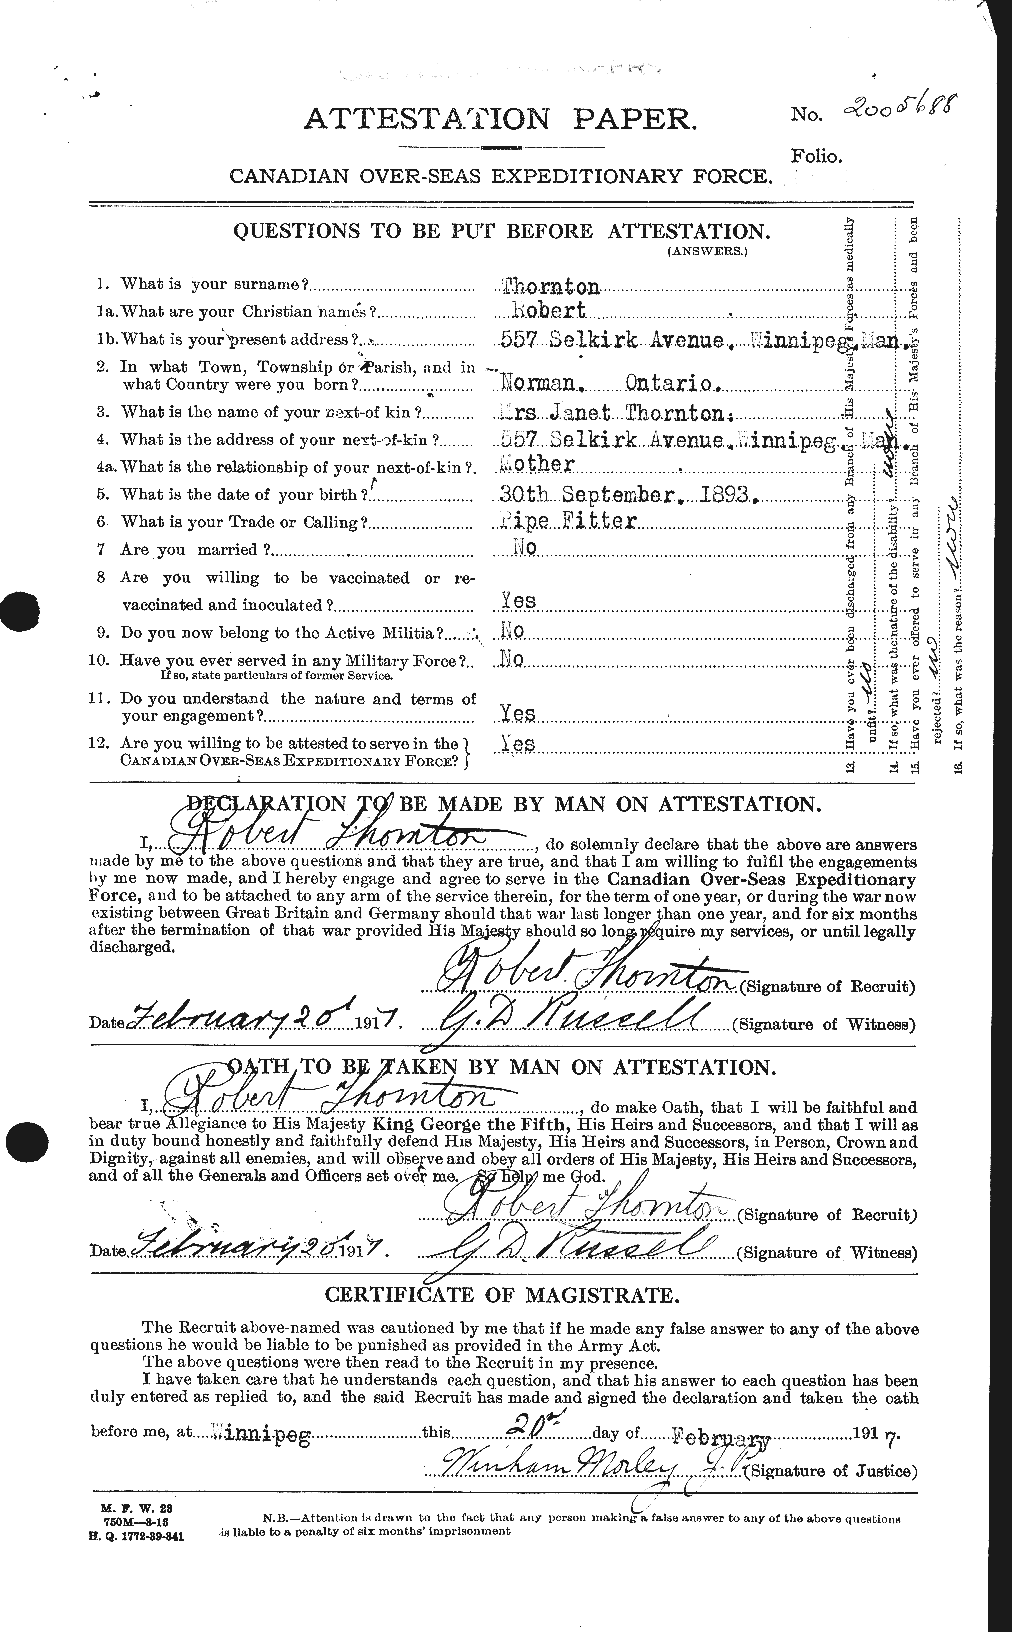 Personnel Records of the First World War - CEF 636876a